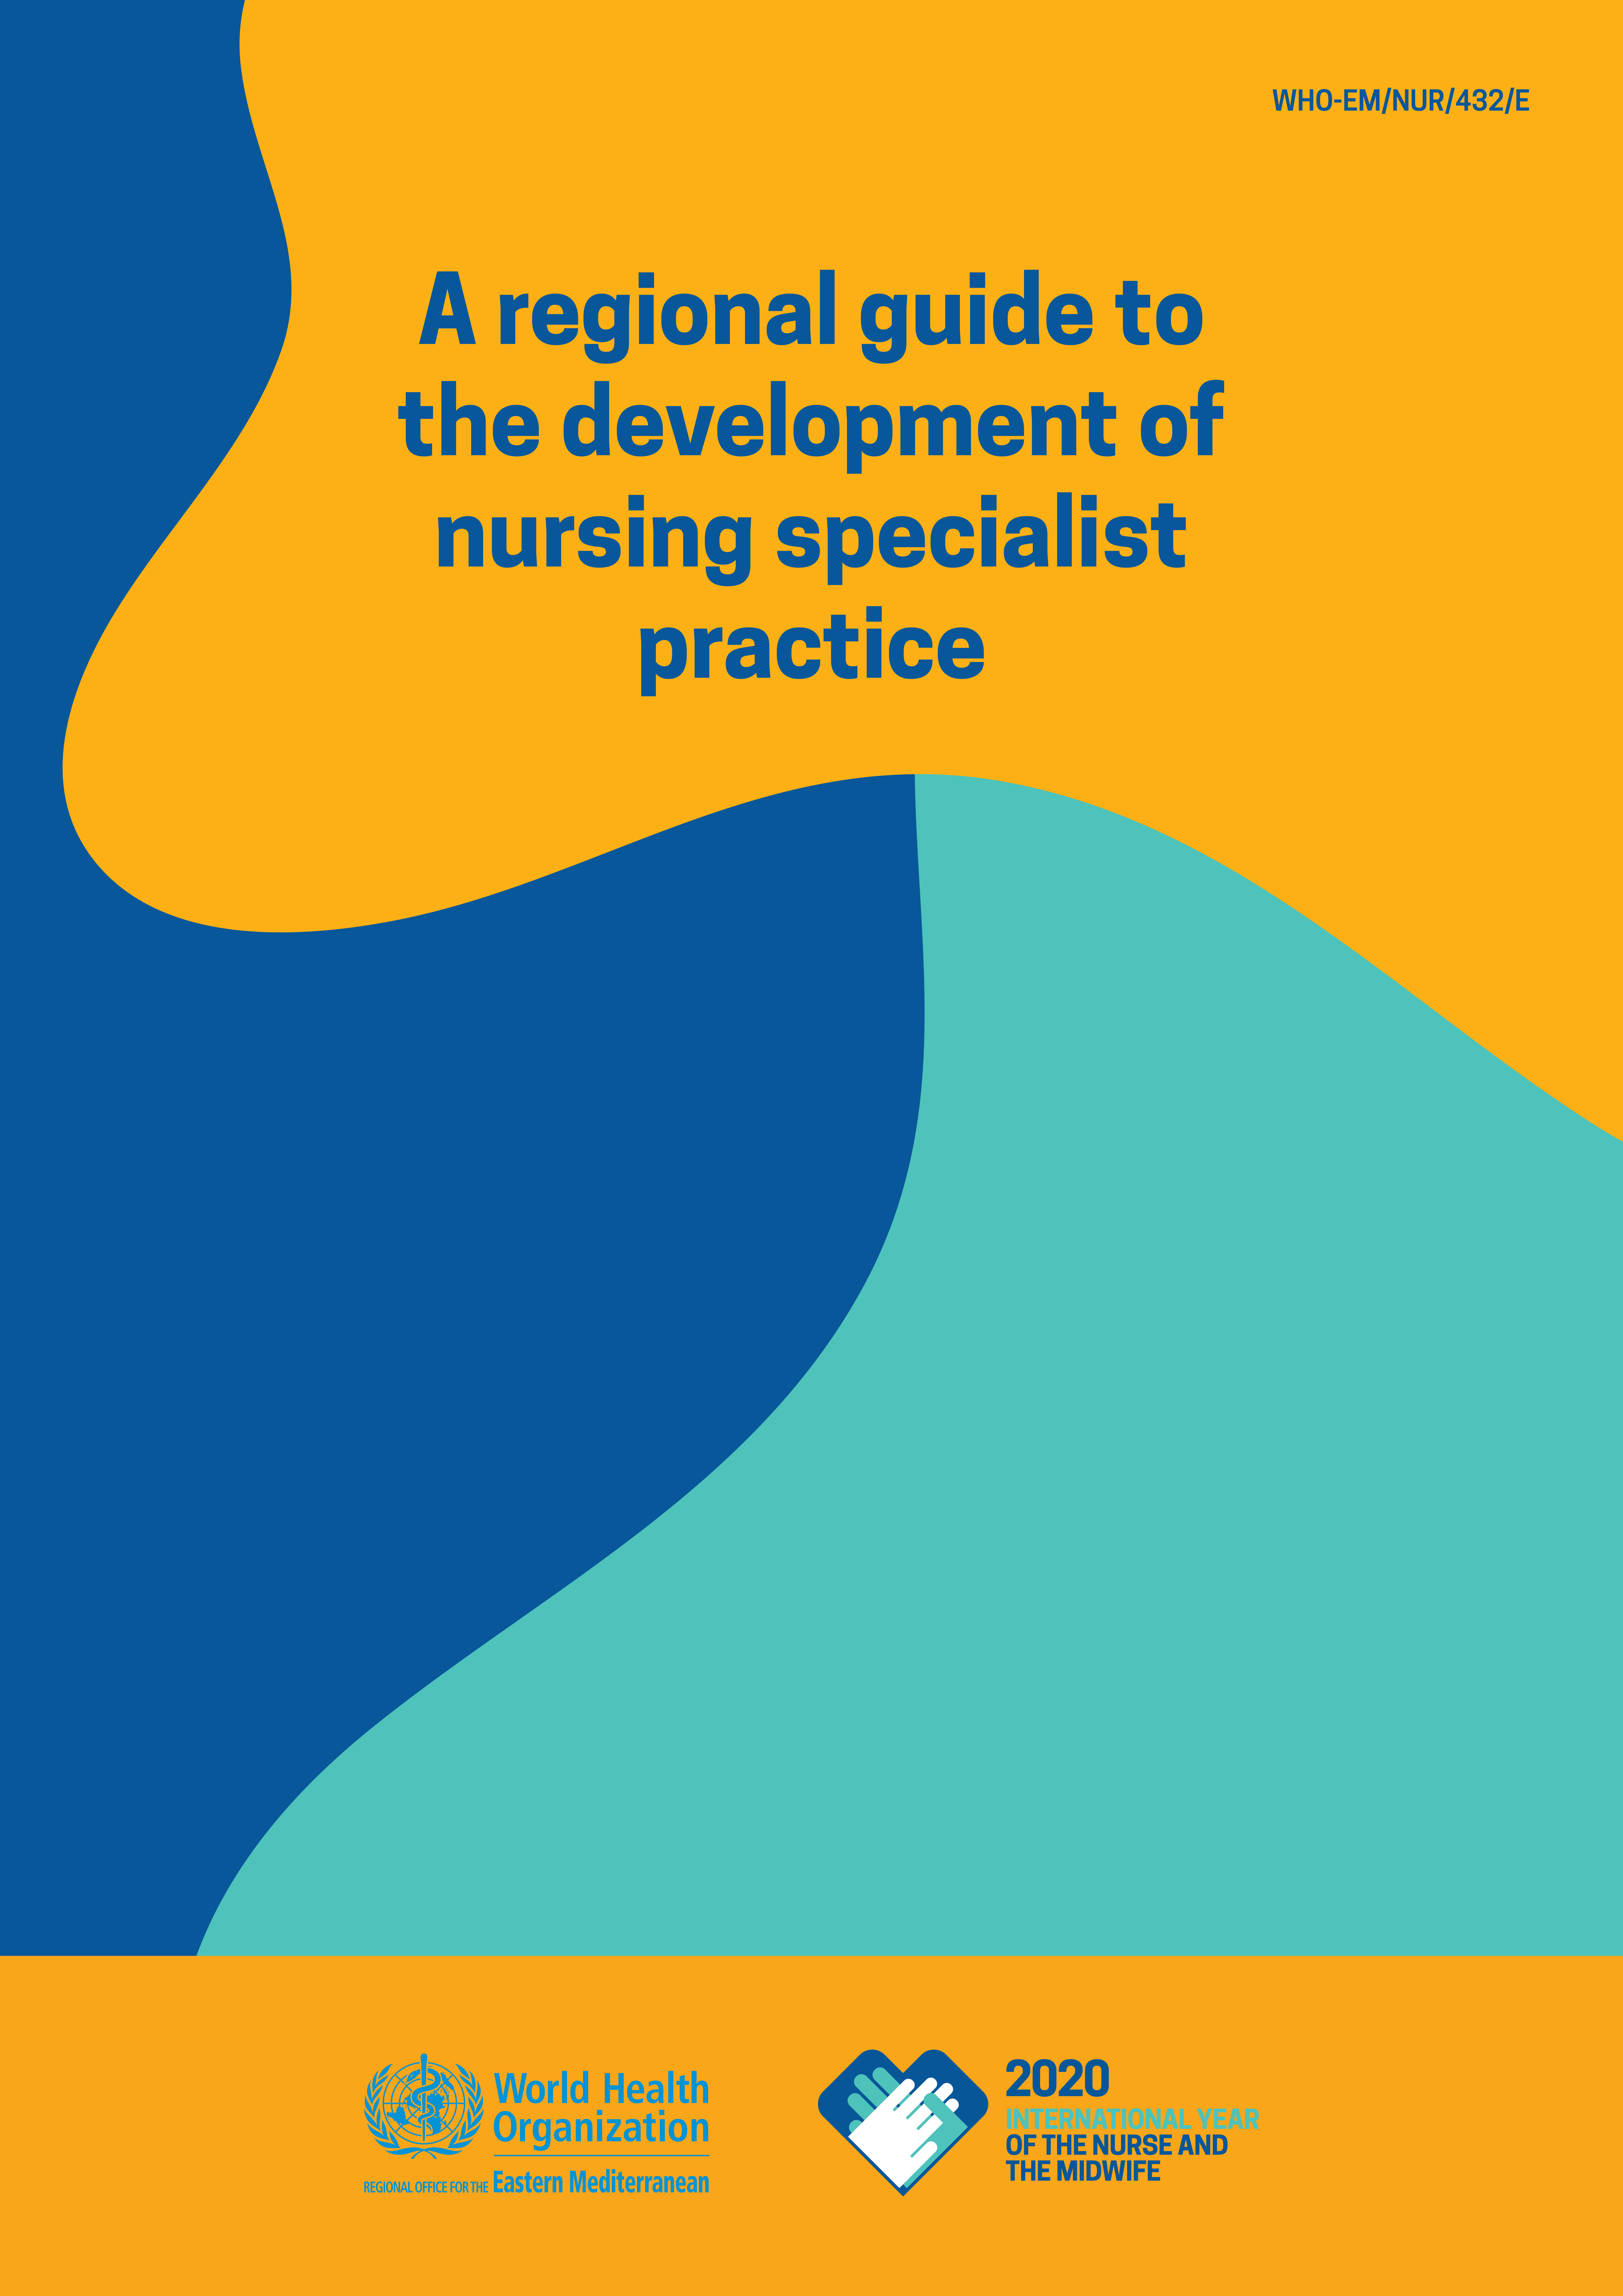 A regional guide to the development of nursing specialist practice